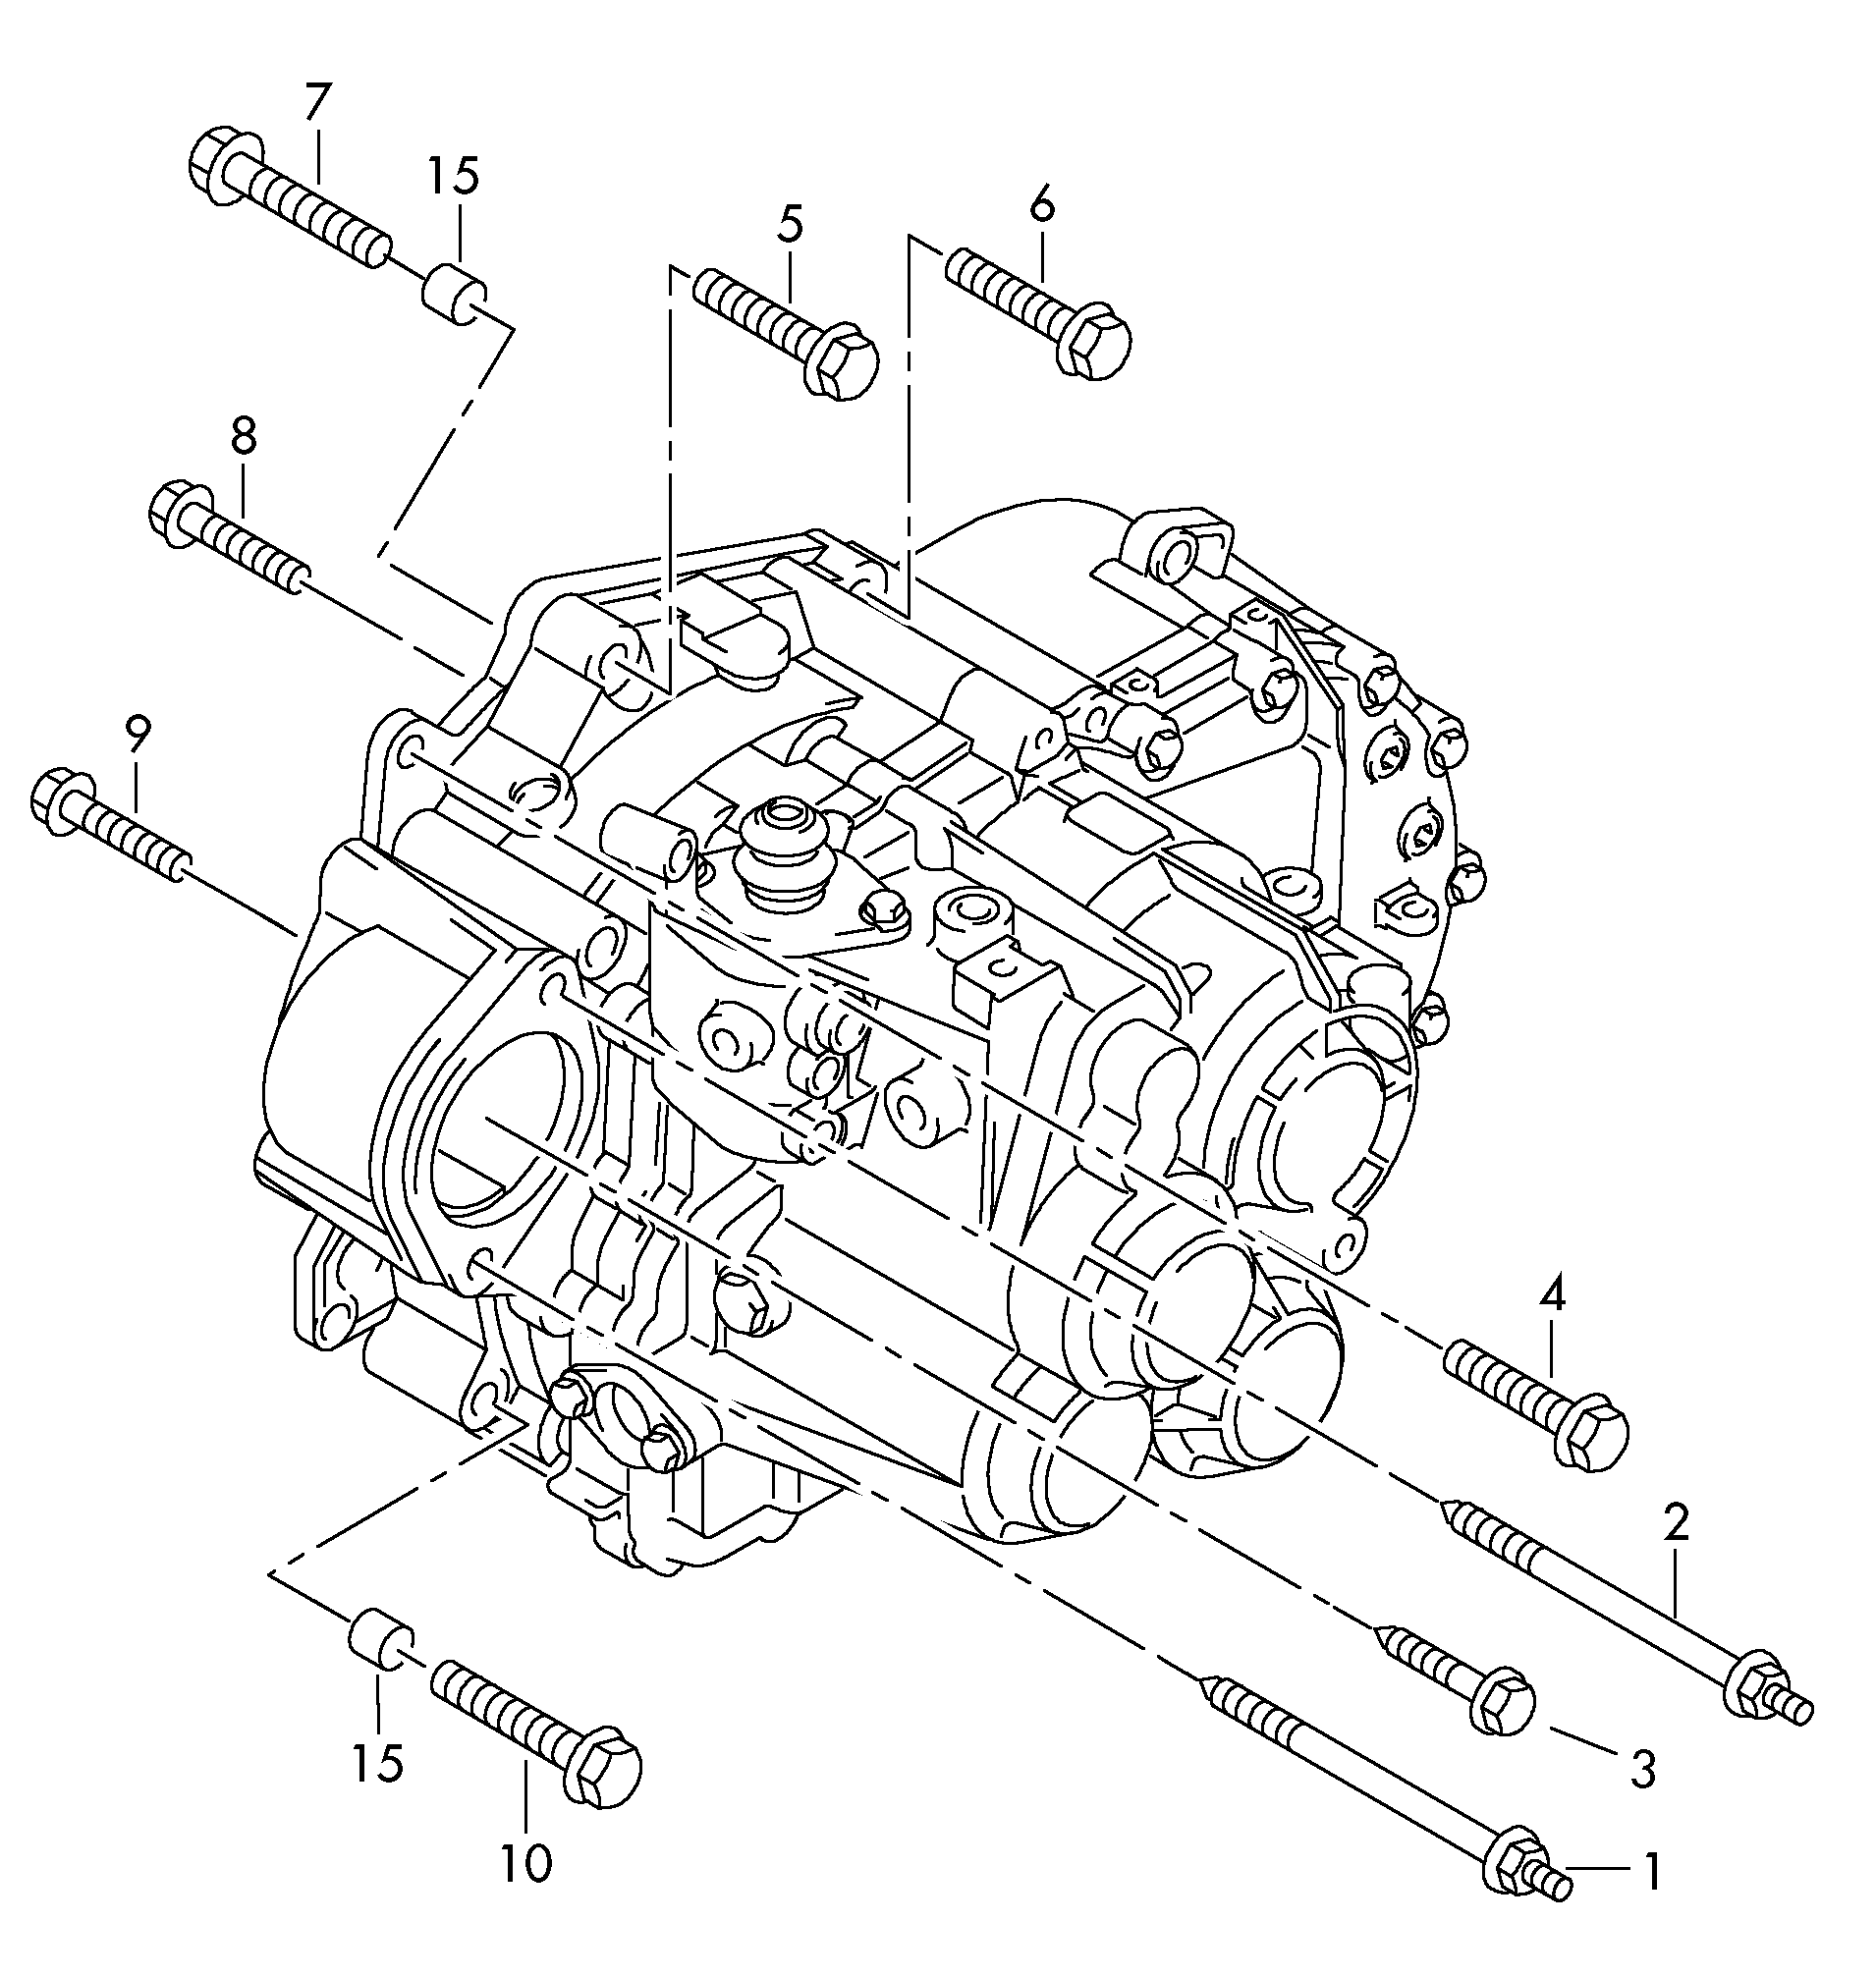 mounting parts for engine and<br>transmission6-speed manual transmission 1.4ltr.<br> MQ350 - Tiguan - tig